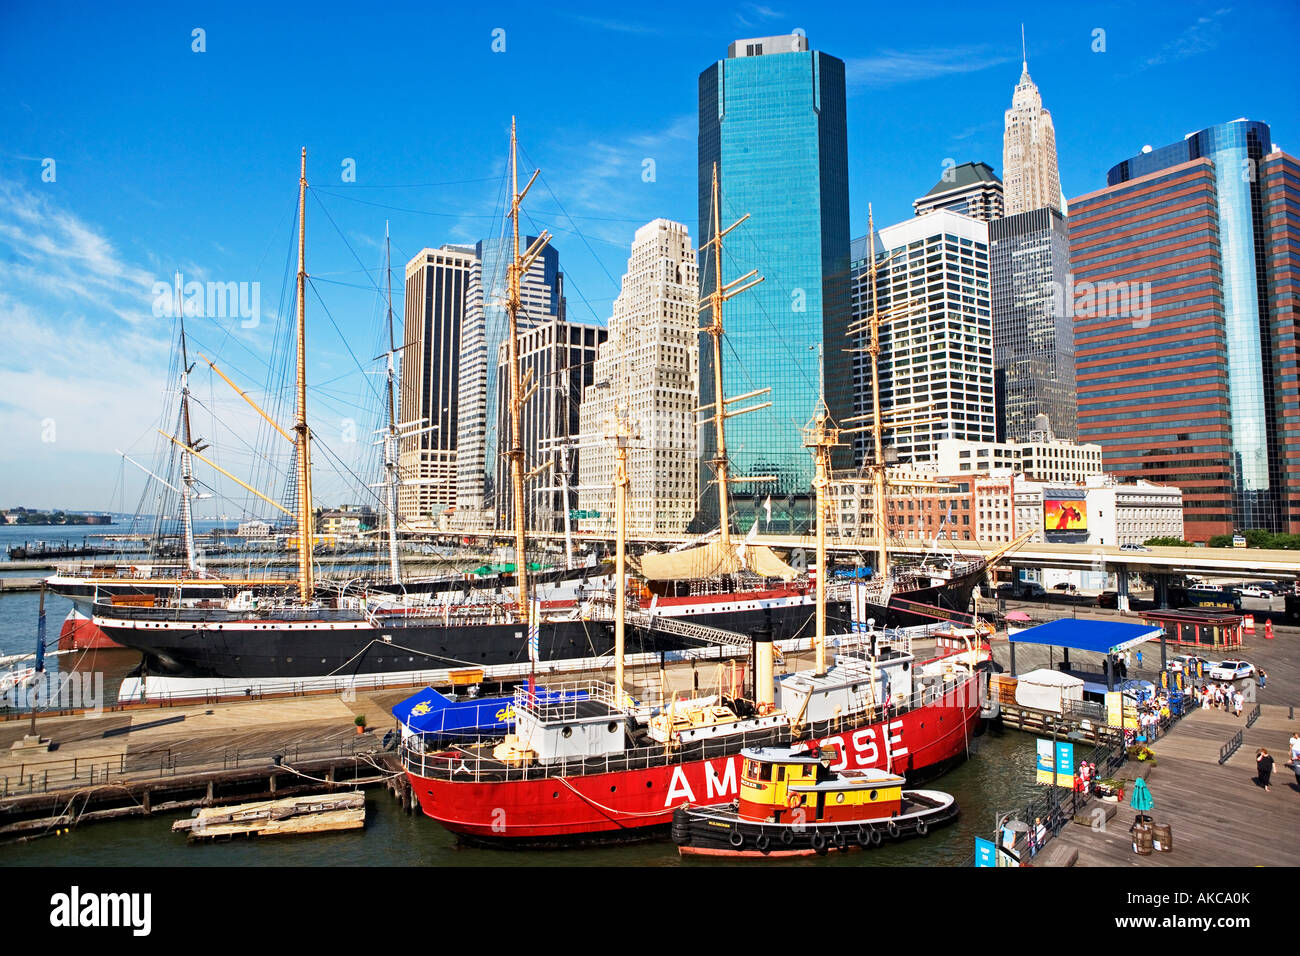 South Street Seaport Museum - #OnThisDay in 1968 the iconic lightship  Ambrose (LV-87/WAL-512), currently docked at Pier 16, arrived at the South  Street Seaport Museum. From 1908 until 1932 she had marked